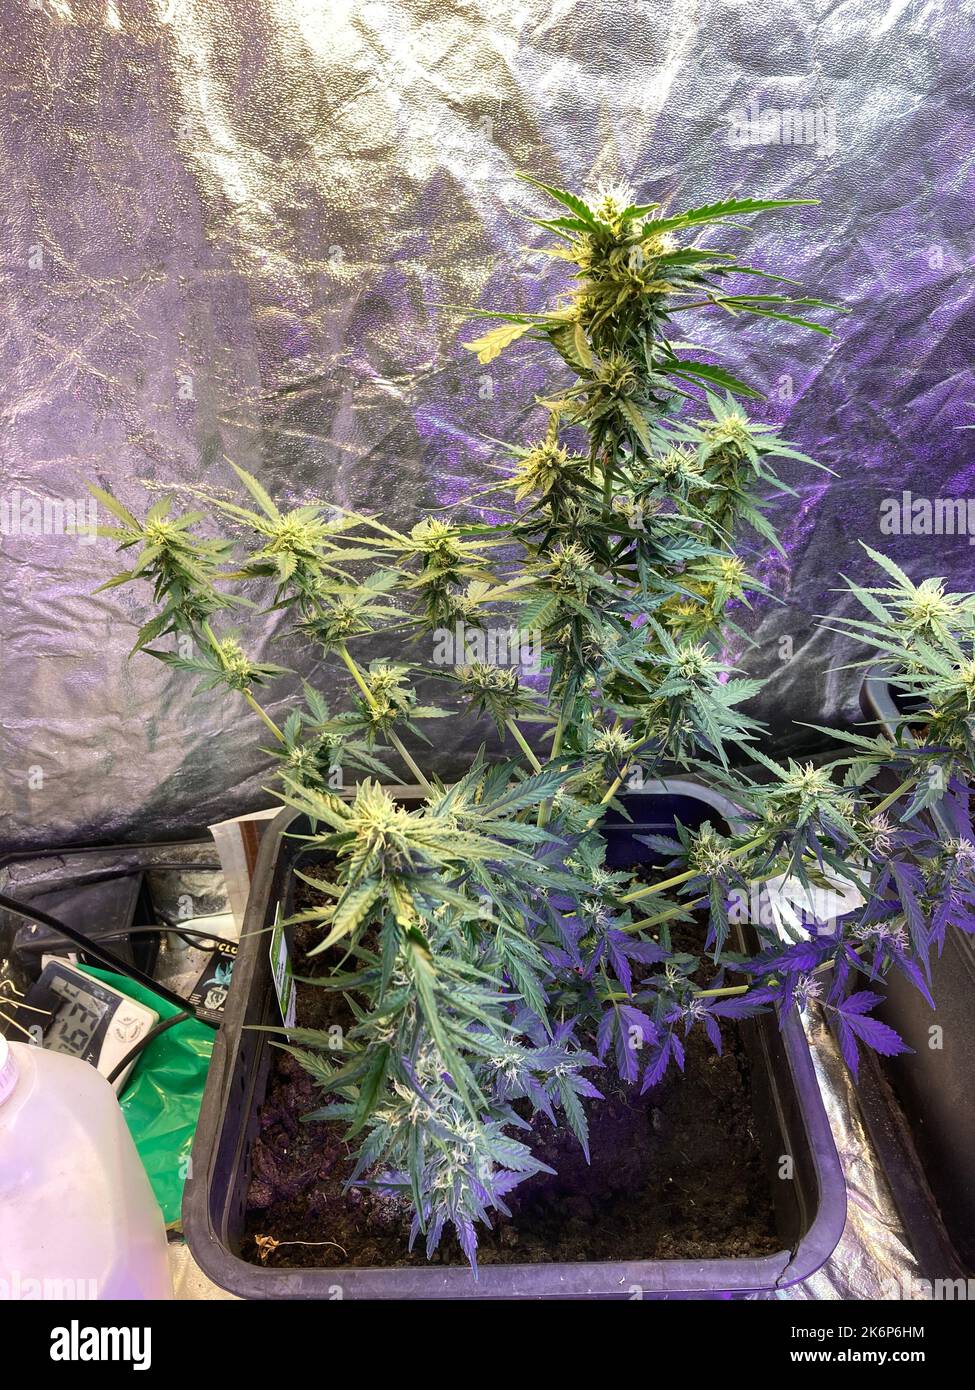 colour image of a female cannabis plant, Cannabis sativa, in a home grow tent Stock Photo